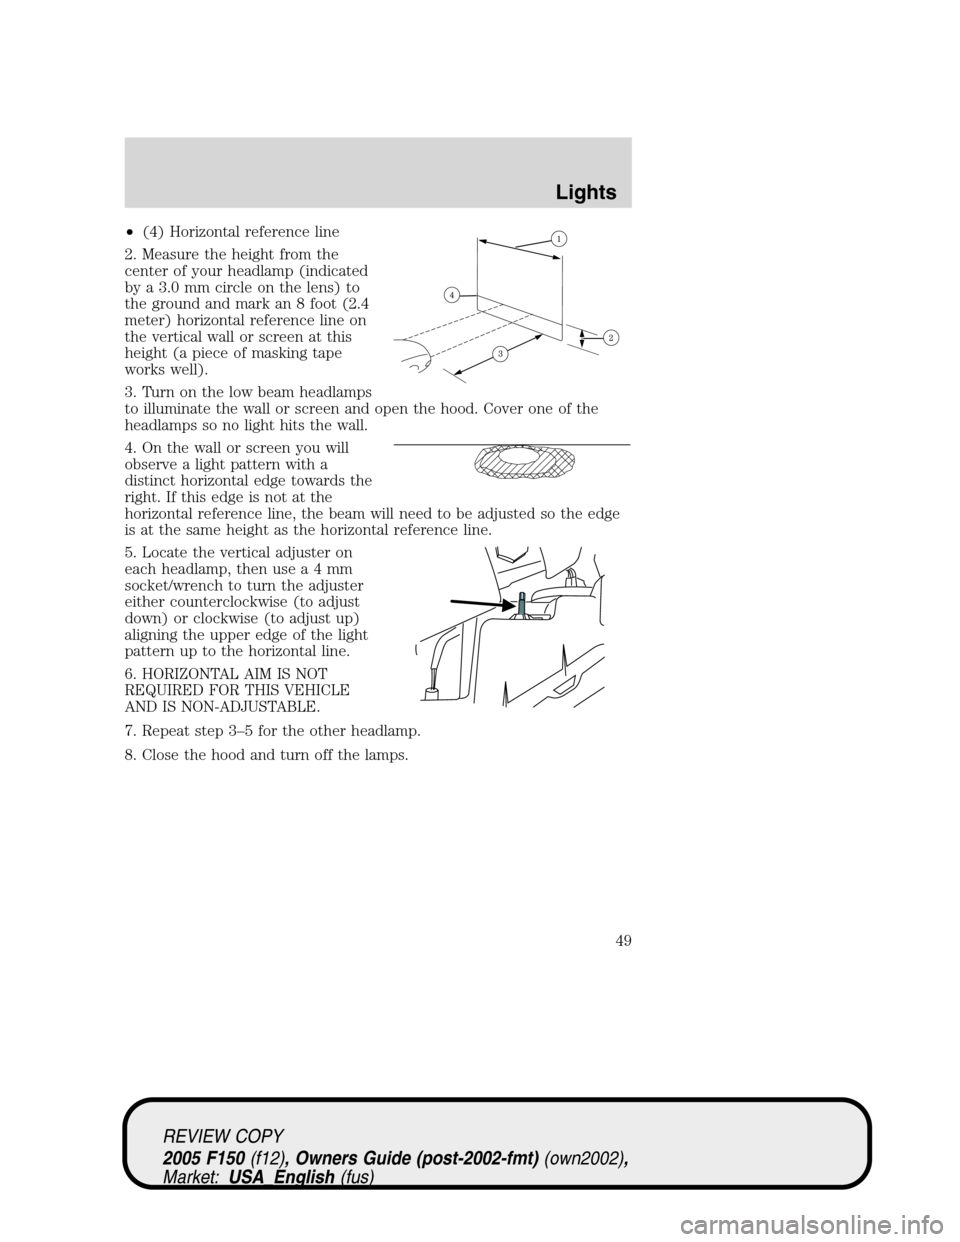 FORD F150 2005 11.G Owners Manual •(4) Horizontal reference line
2. Measure the height from the
center of your headlamp (indicated
by a 3.0 mm circle on the lens) to
the ground and mark an 8 foot (2.4
meter) horizontal reference lin